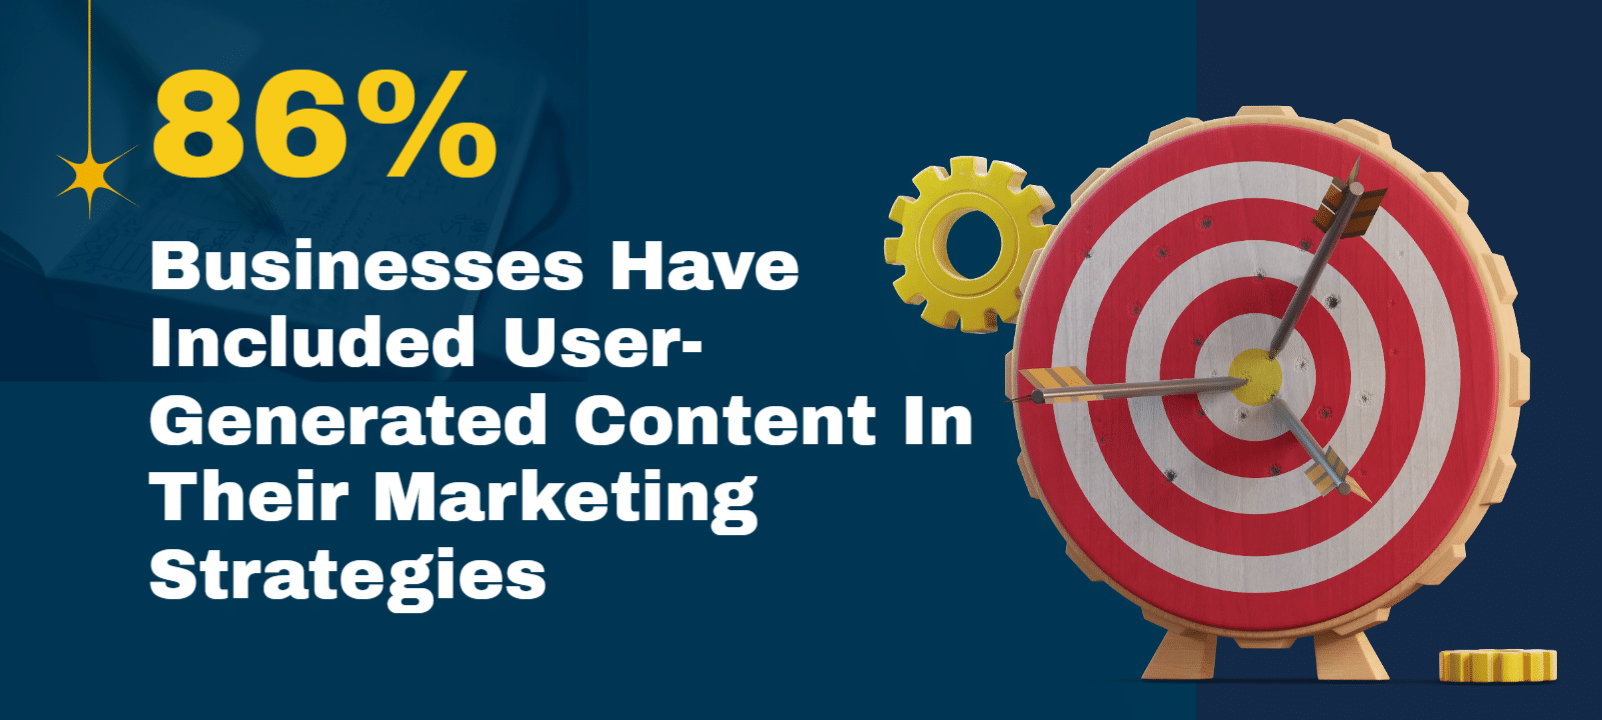 user generated content stats for marketing strategies